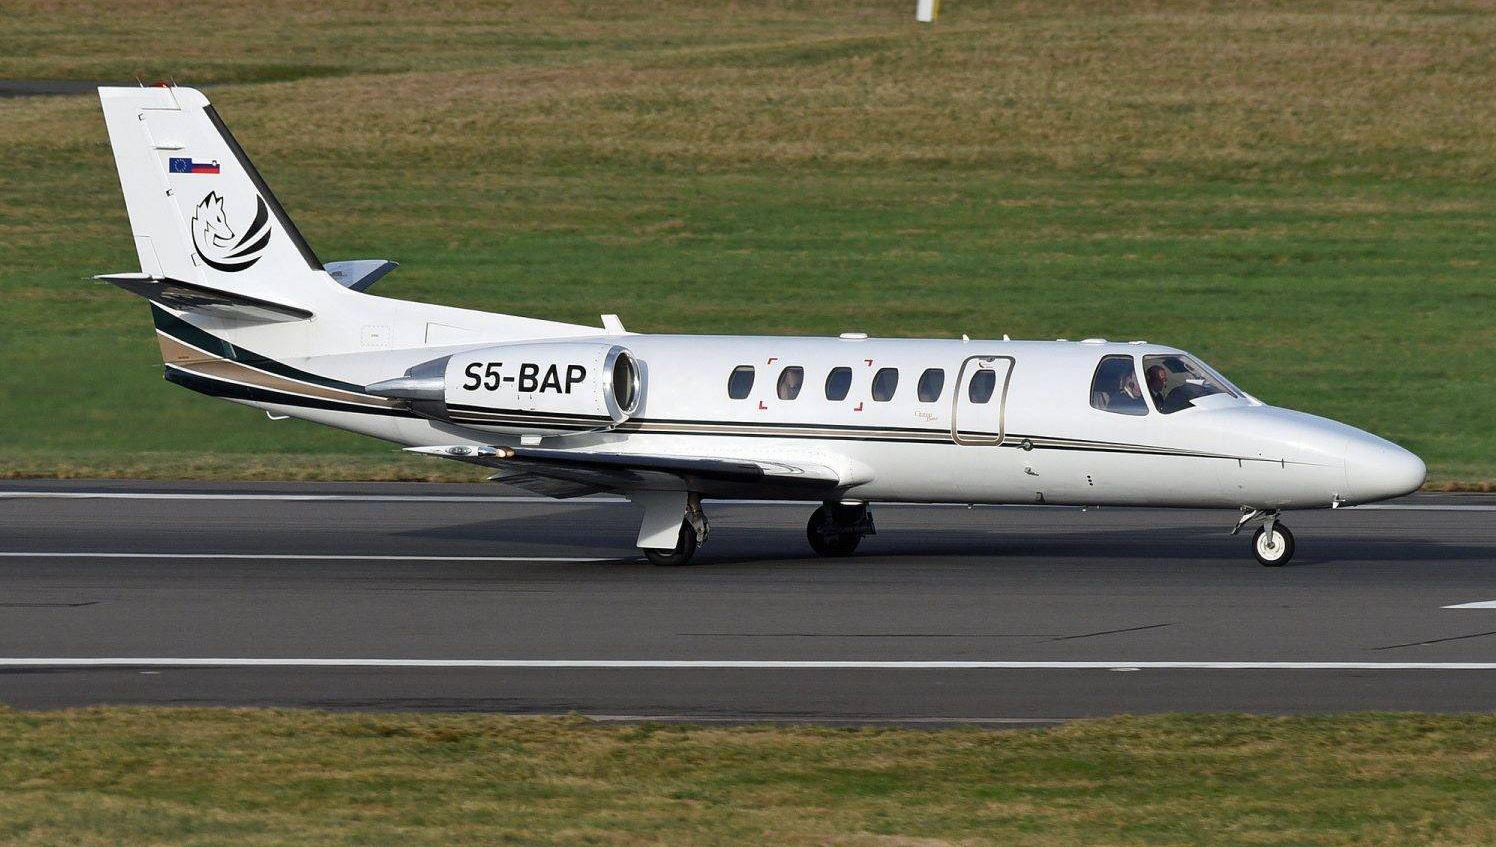 2001 Cessna 550 Citation Bravo Private Jet For Sale (S5-BAP) From FA Aircraft Sales On AvPay aircraft exterior right side